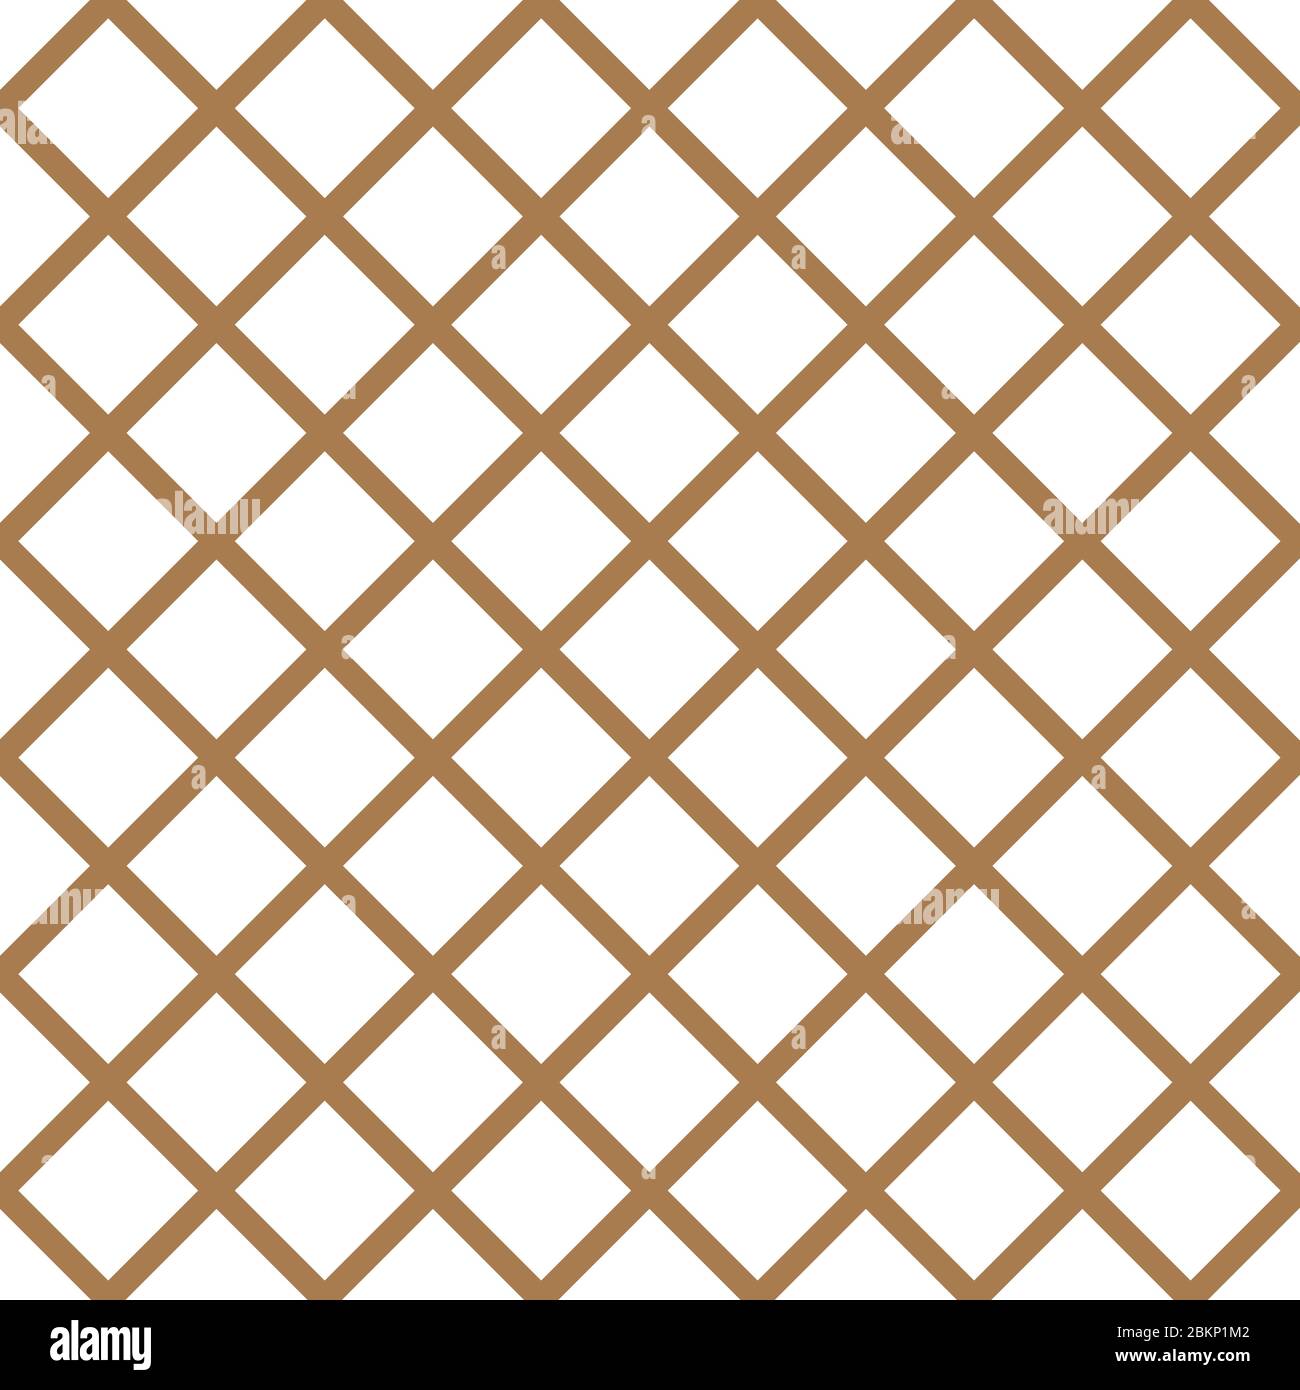 Net, grid seamless texture. Cage or Wire Mesh Stock Vector Image